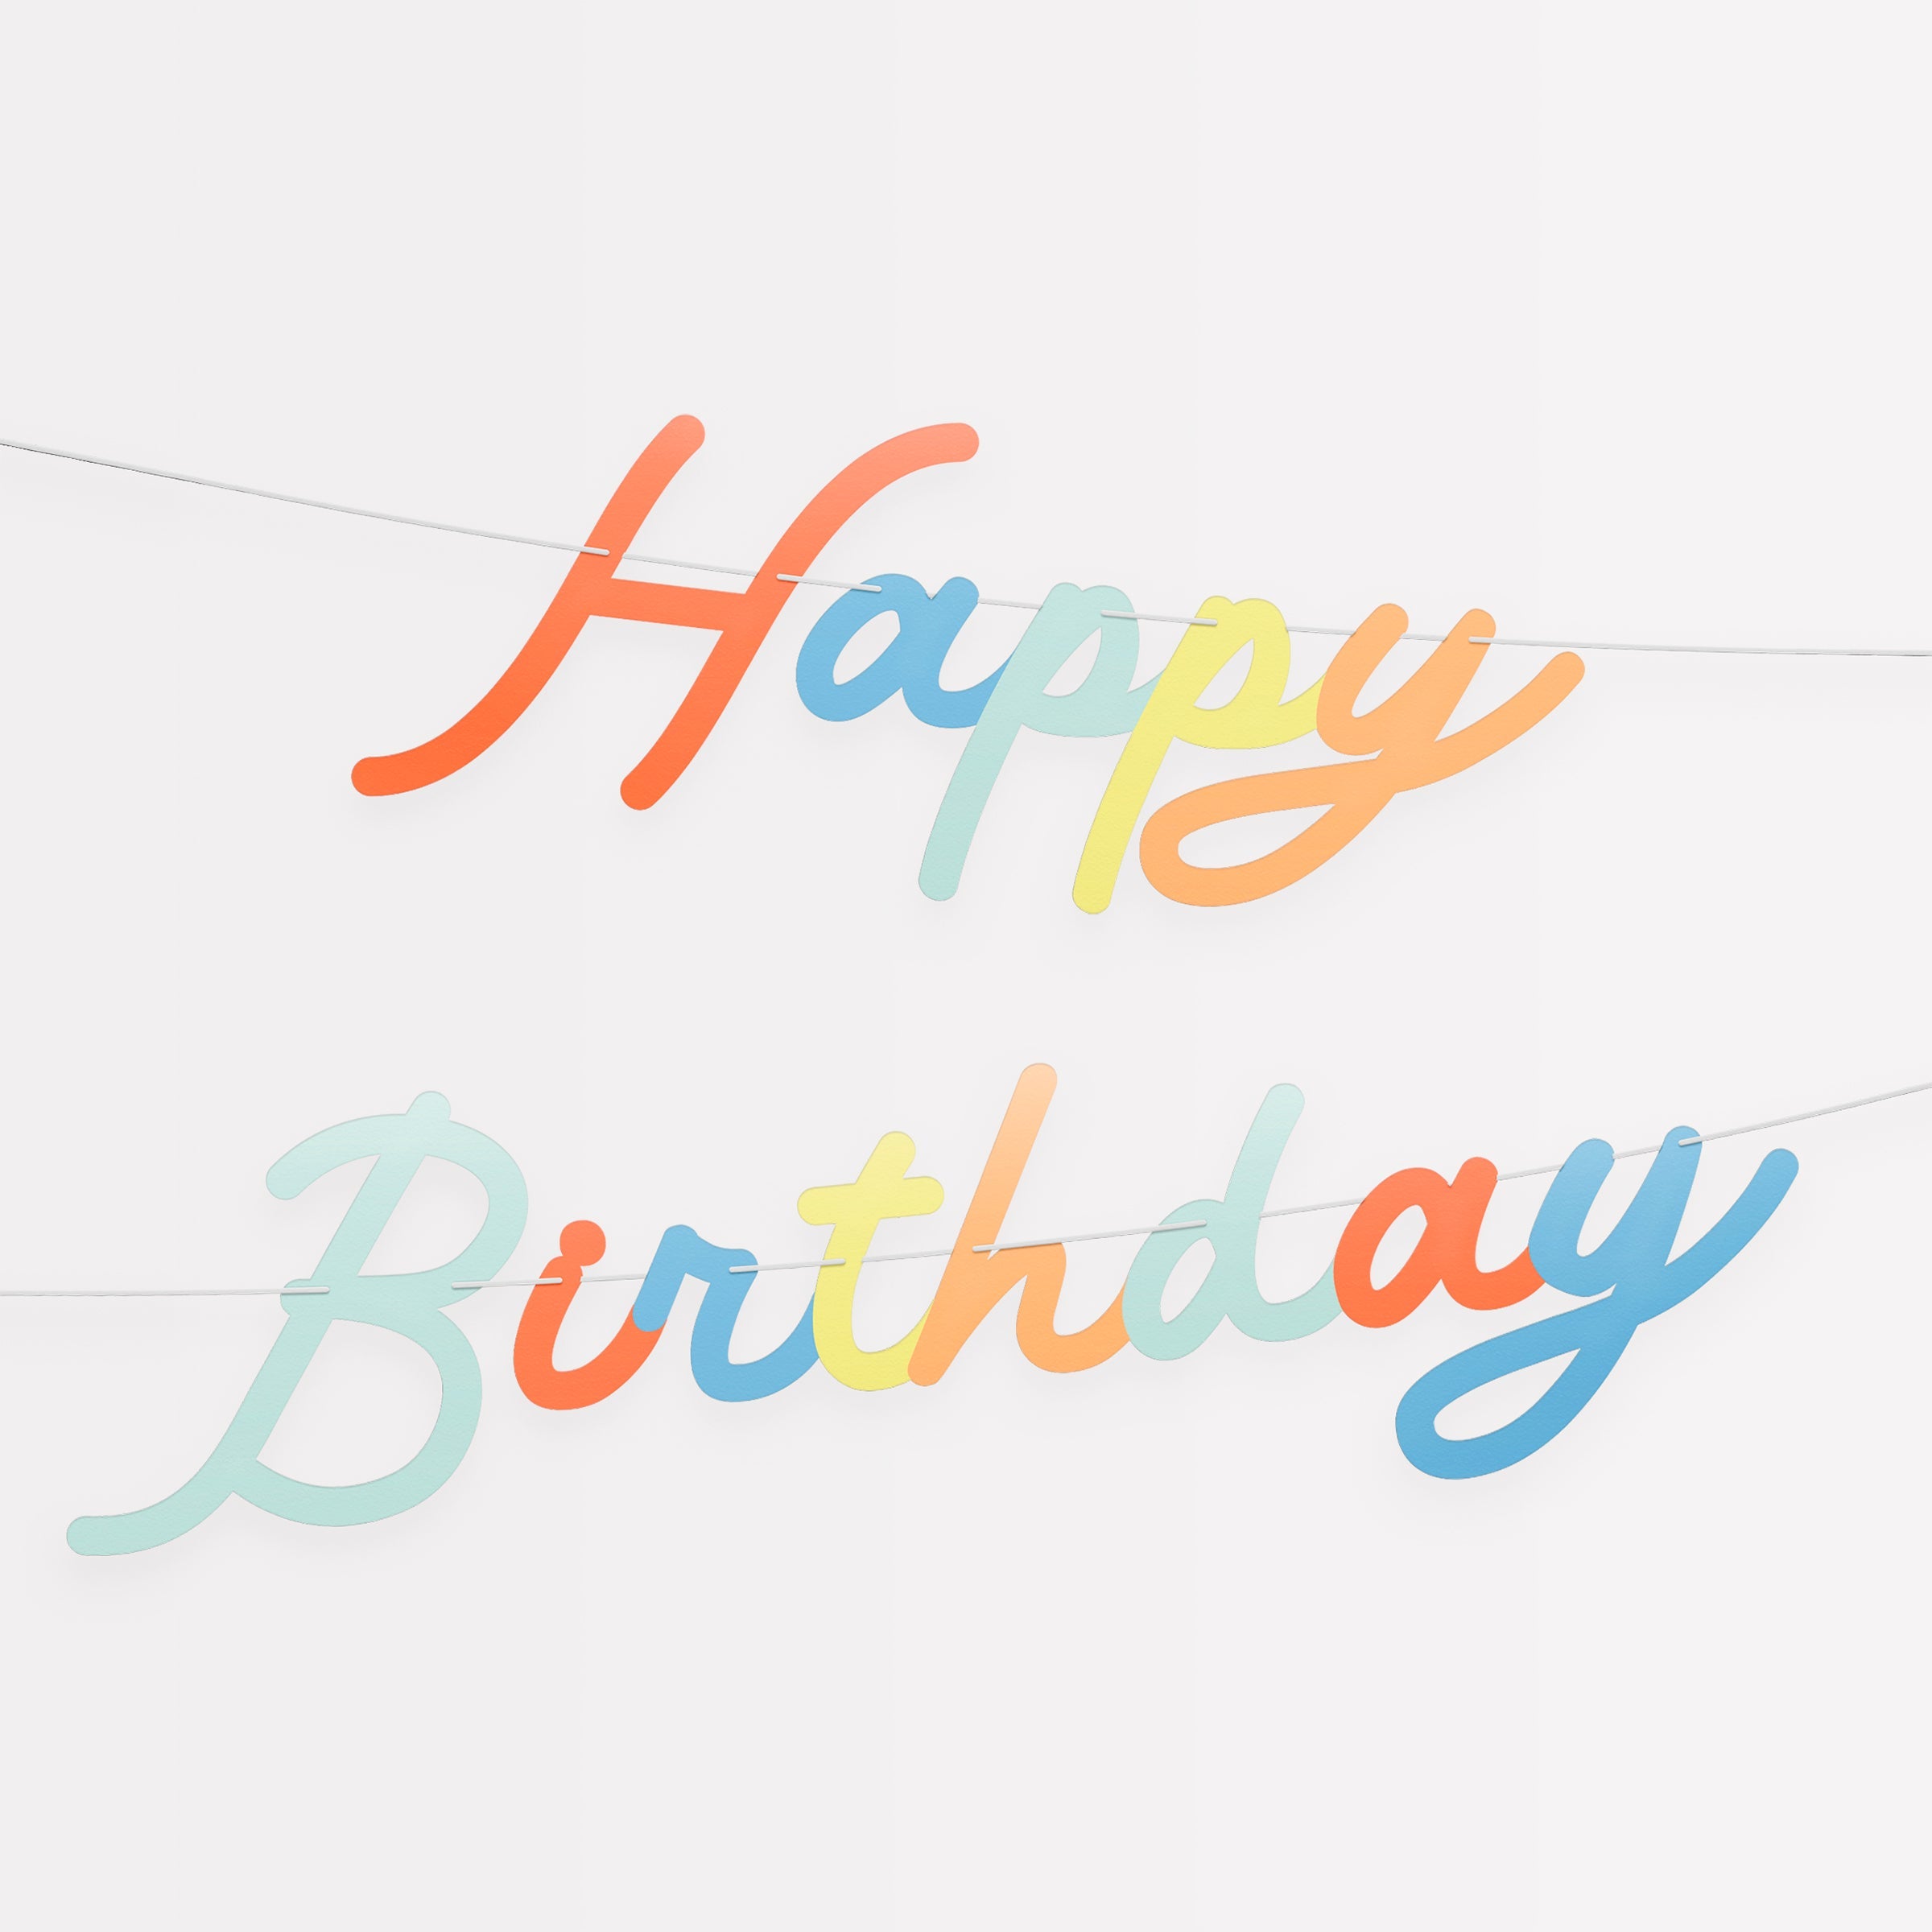 If you're looking for happy birthday decorations you'll love our bright paper garland.